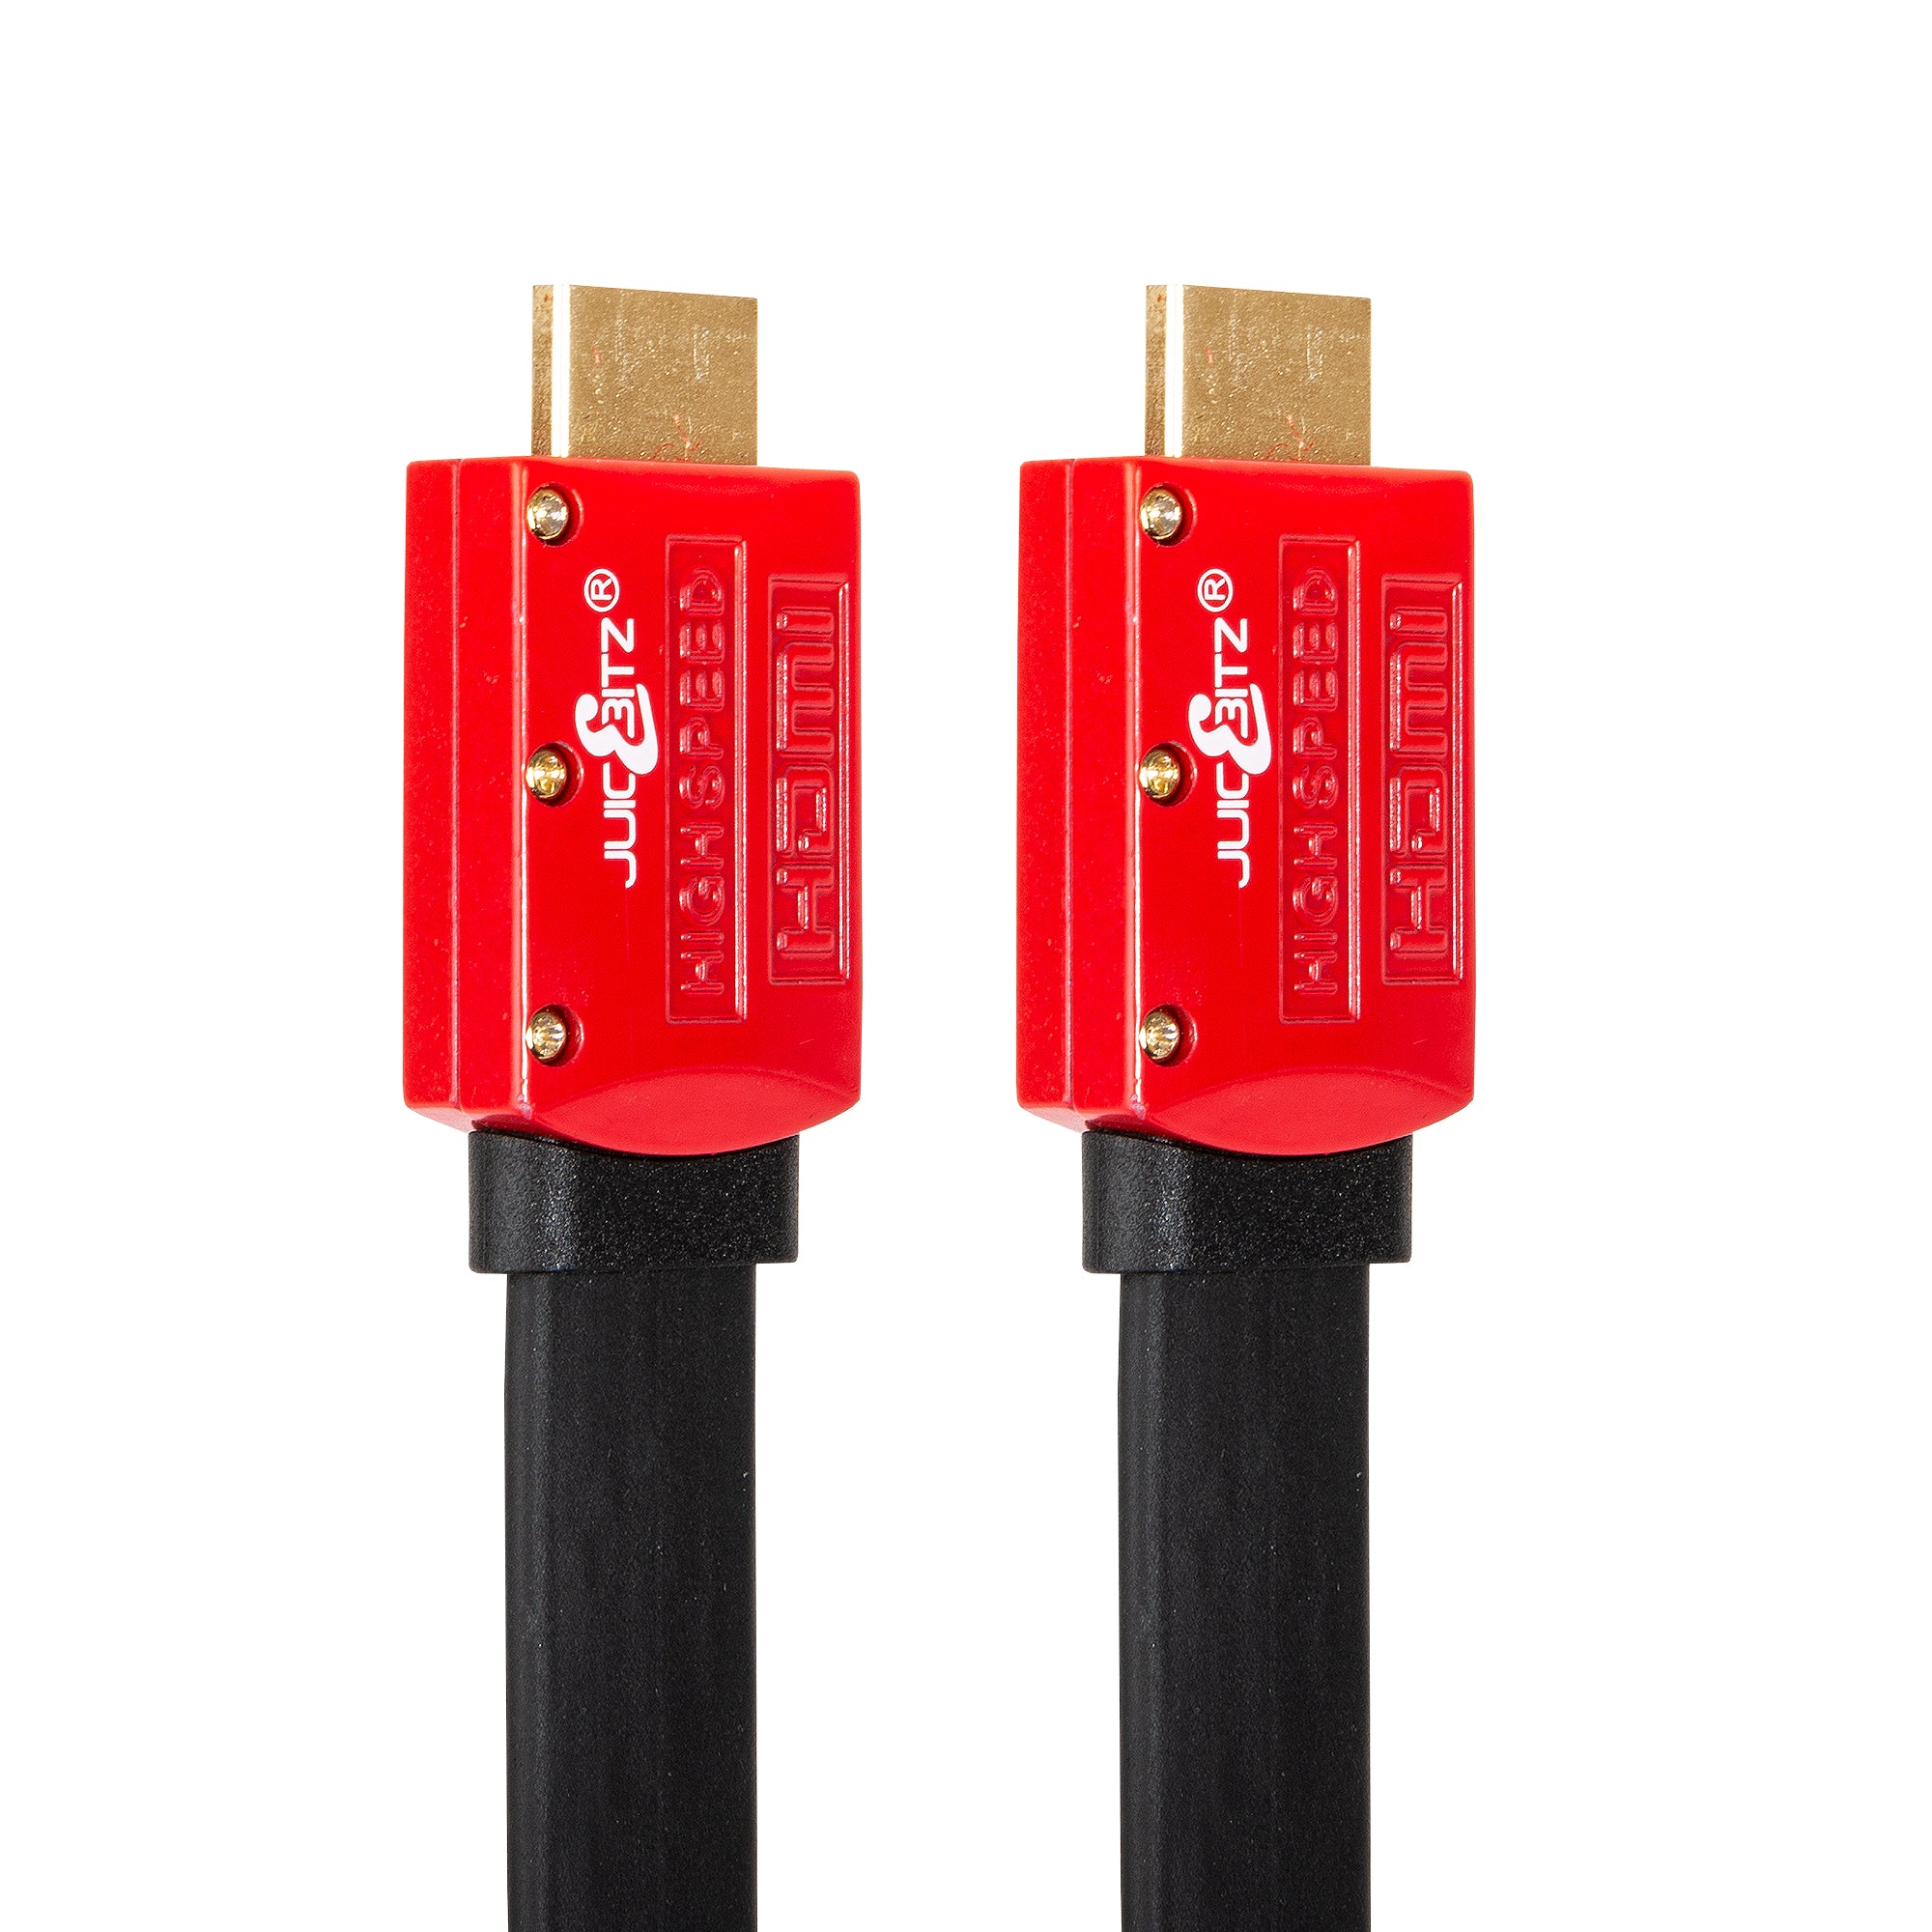 Flat HDMI v2.0 4k 60fps Ultra HD High Speed Cable HDR Graphics, Straight Connectors